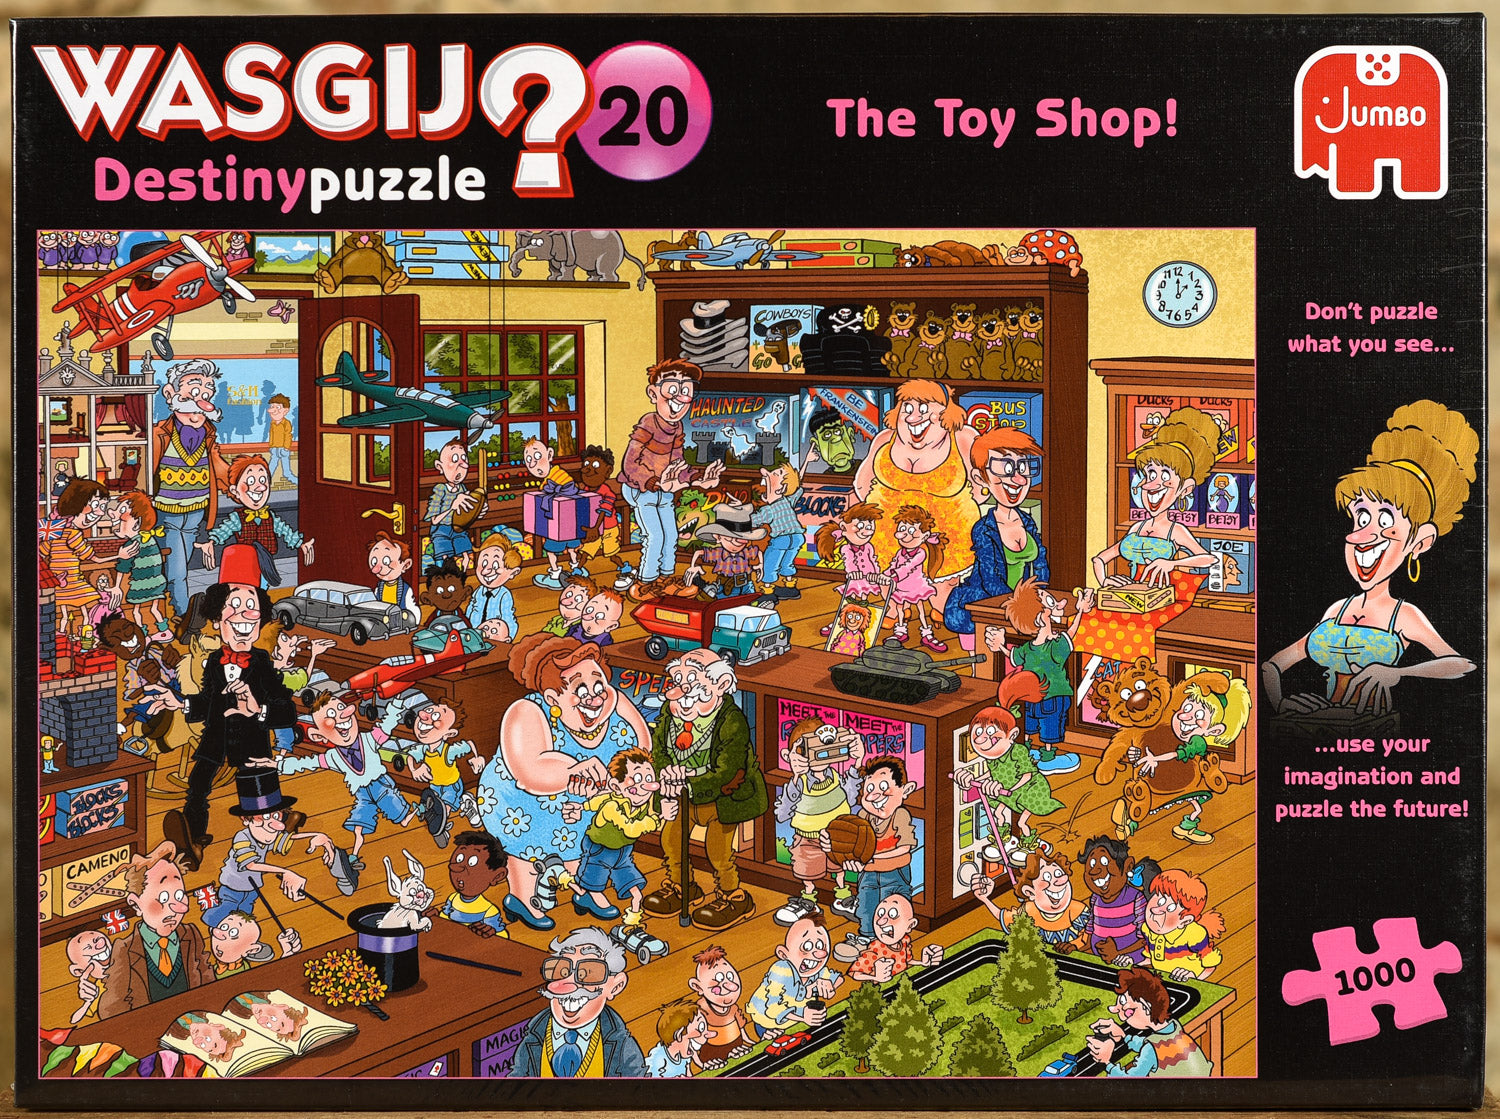 This is a Wasgij puzzle. Instead of piecing together the picture